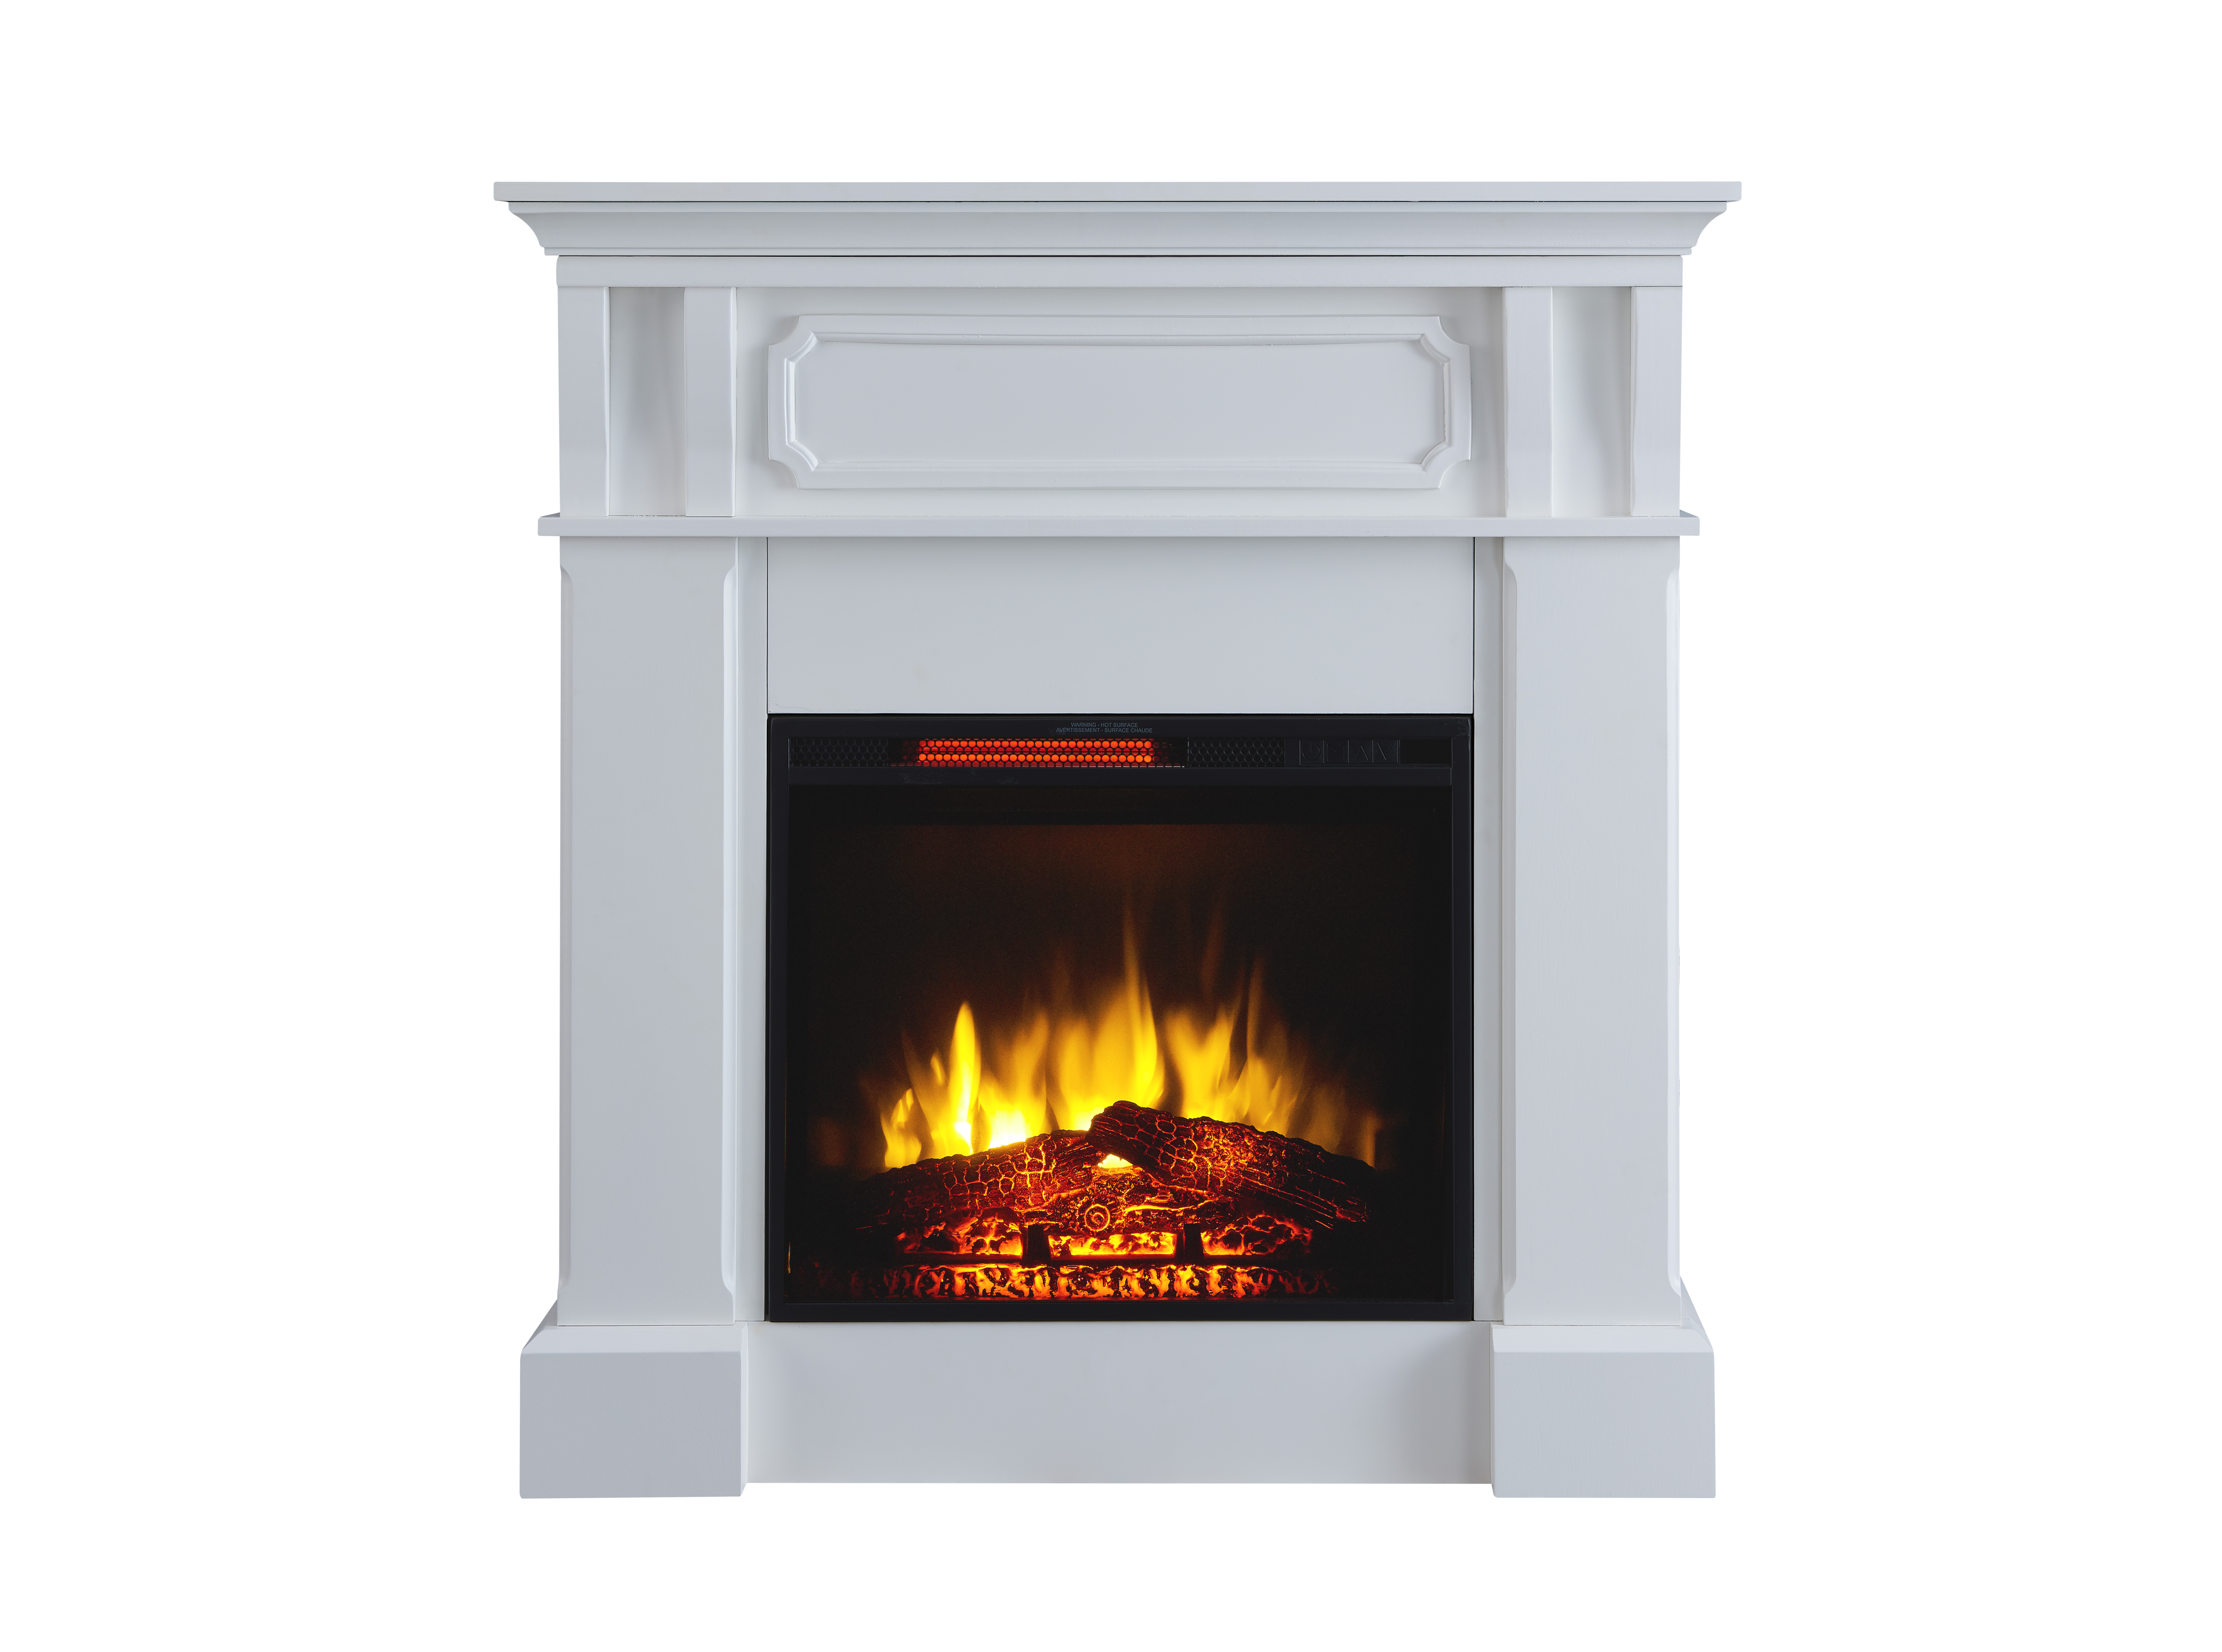 Prokonian Free stand Electric Fireplace with 40" Mantel, White - image 2 of 5